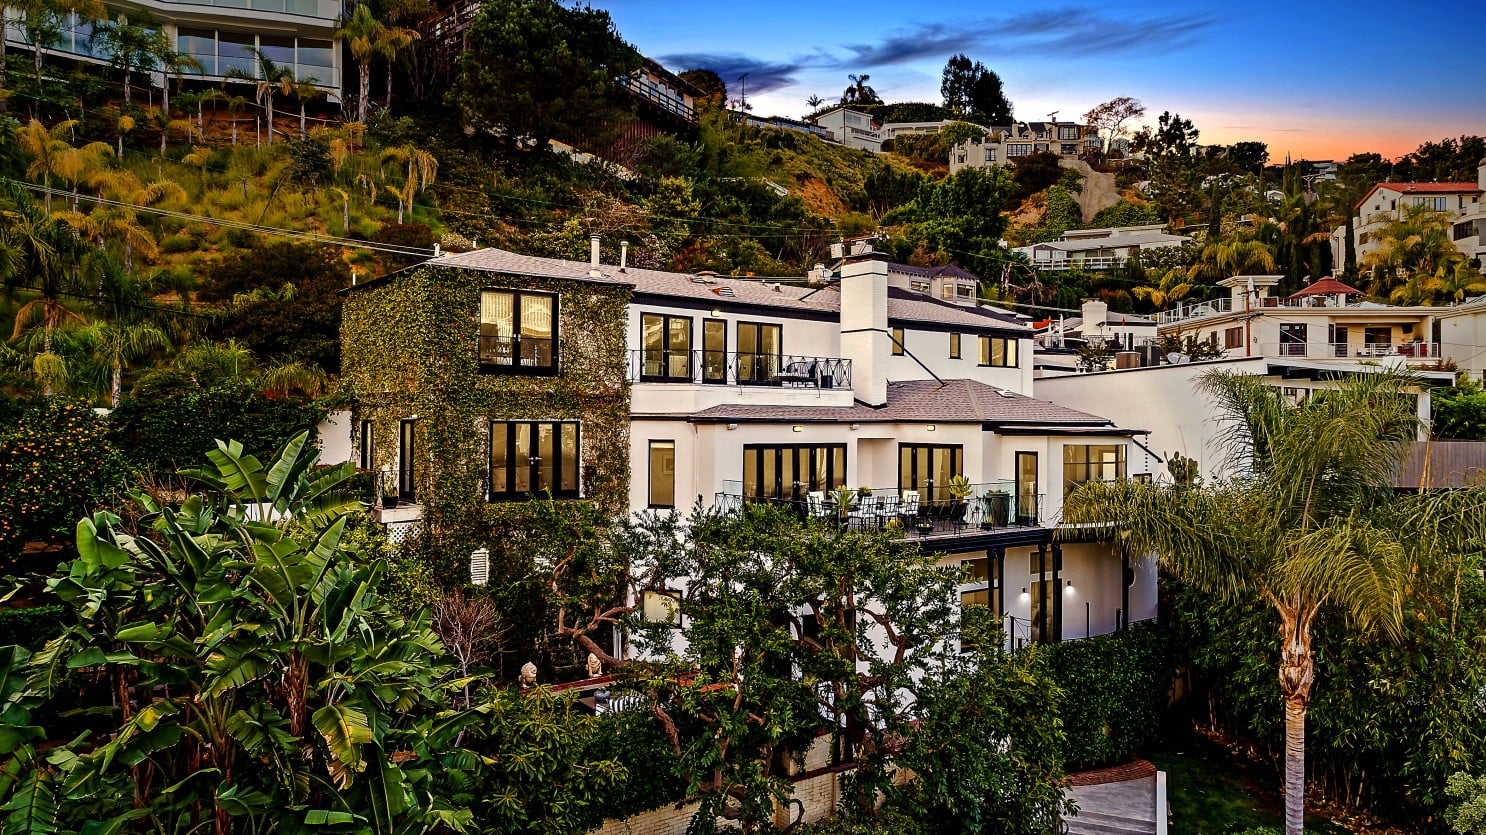 Late Judy Garland's Hollywood Hills Home Listed for $6 Million